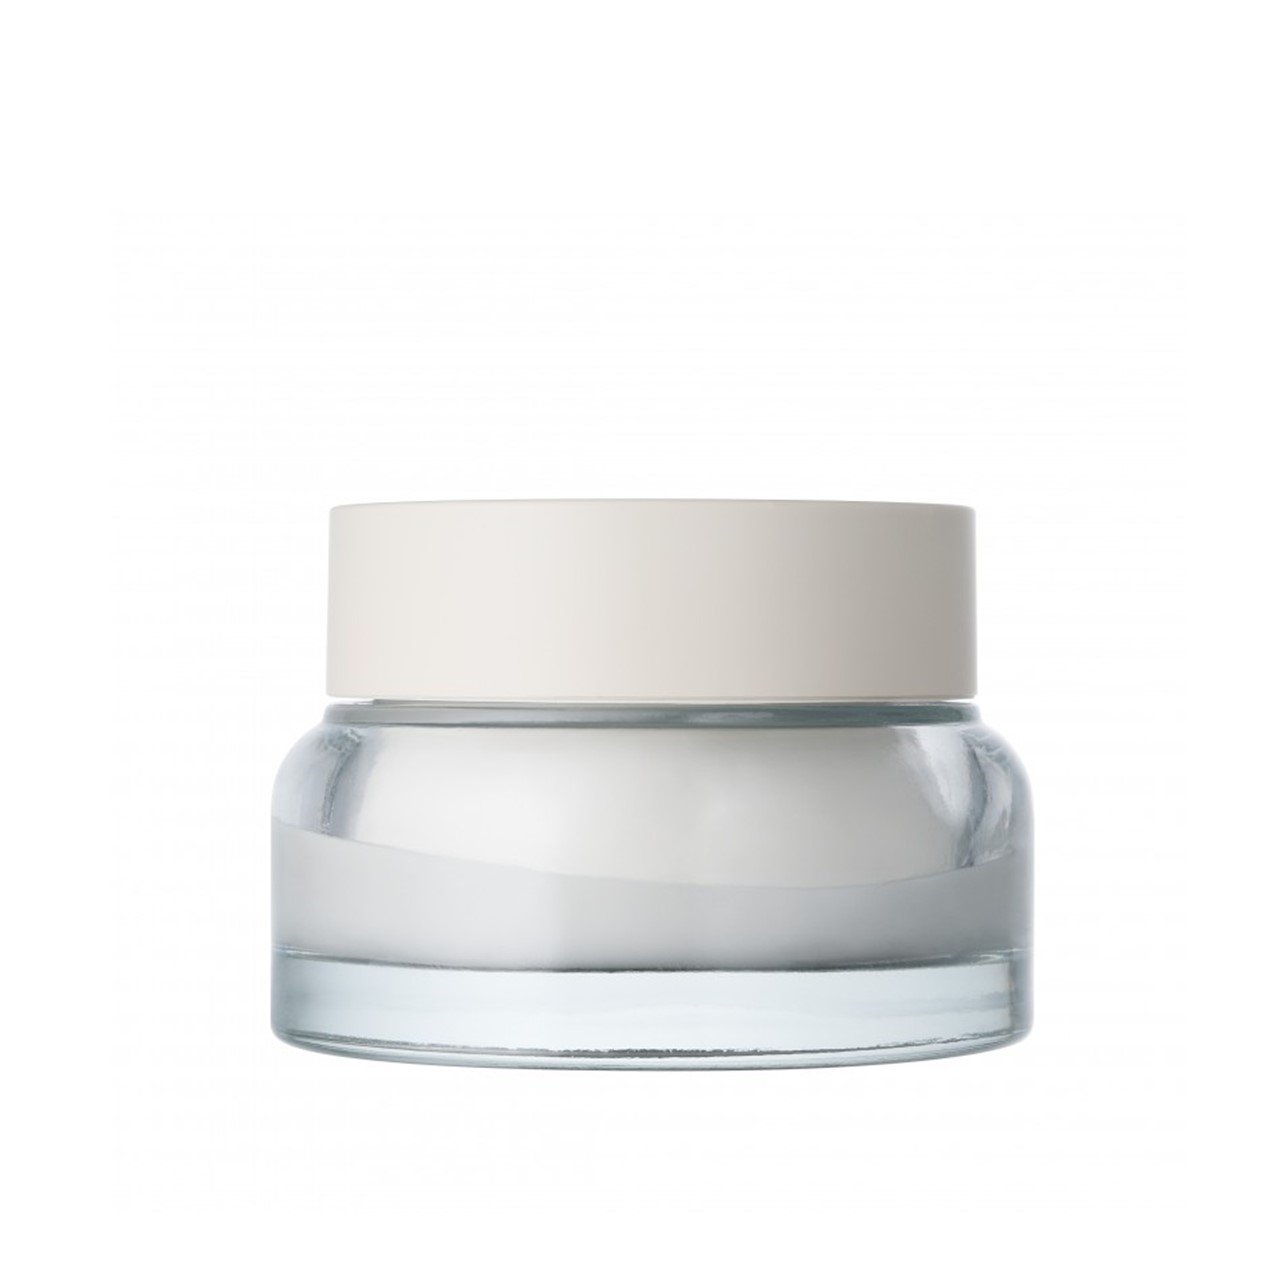 Sioris Enriched by Nature Cream 50ml